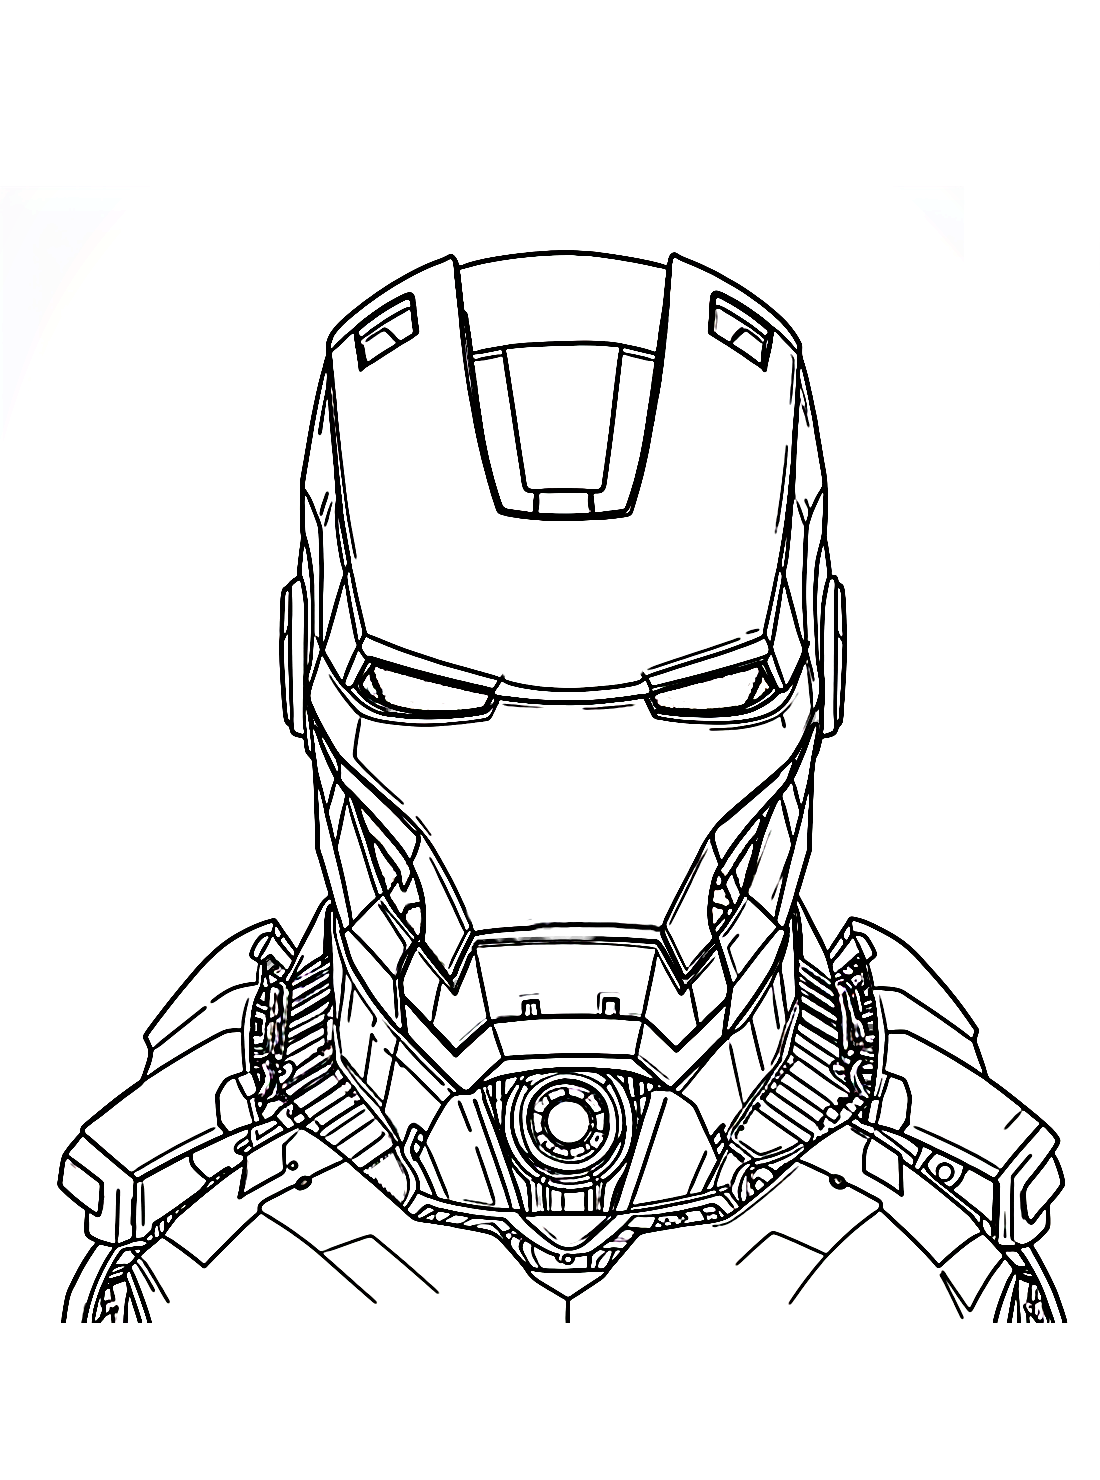 Tony Stark in The Comics - Coloring Online Free